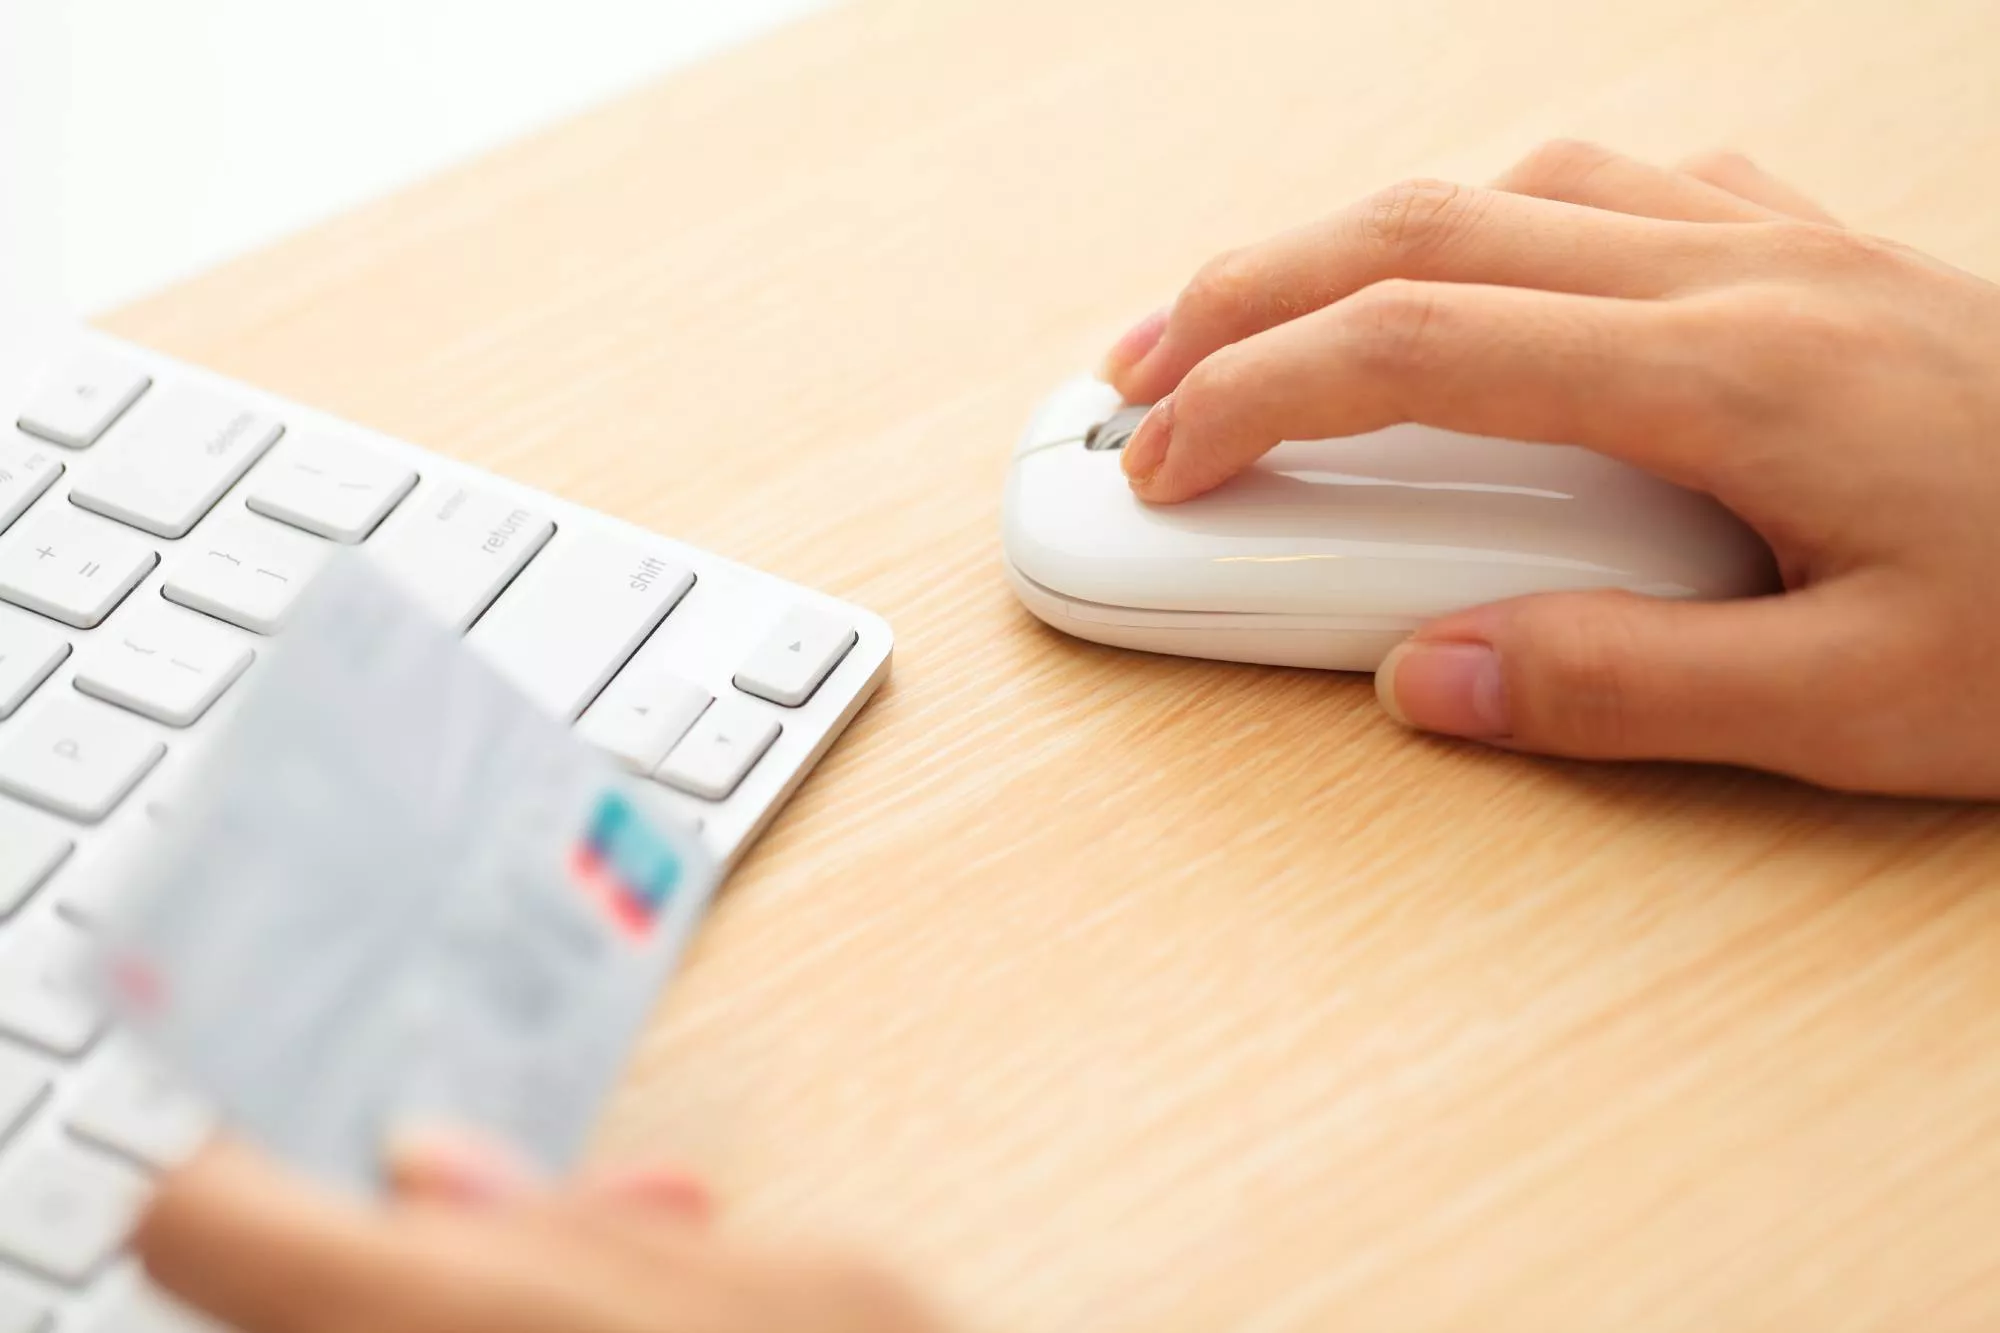 online shopper using payment portal to purchase with card